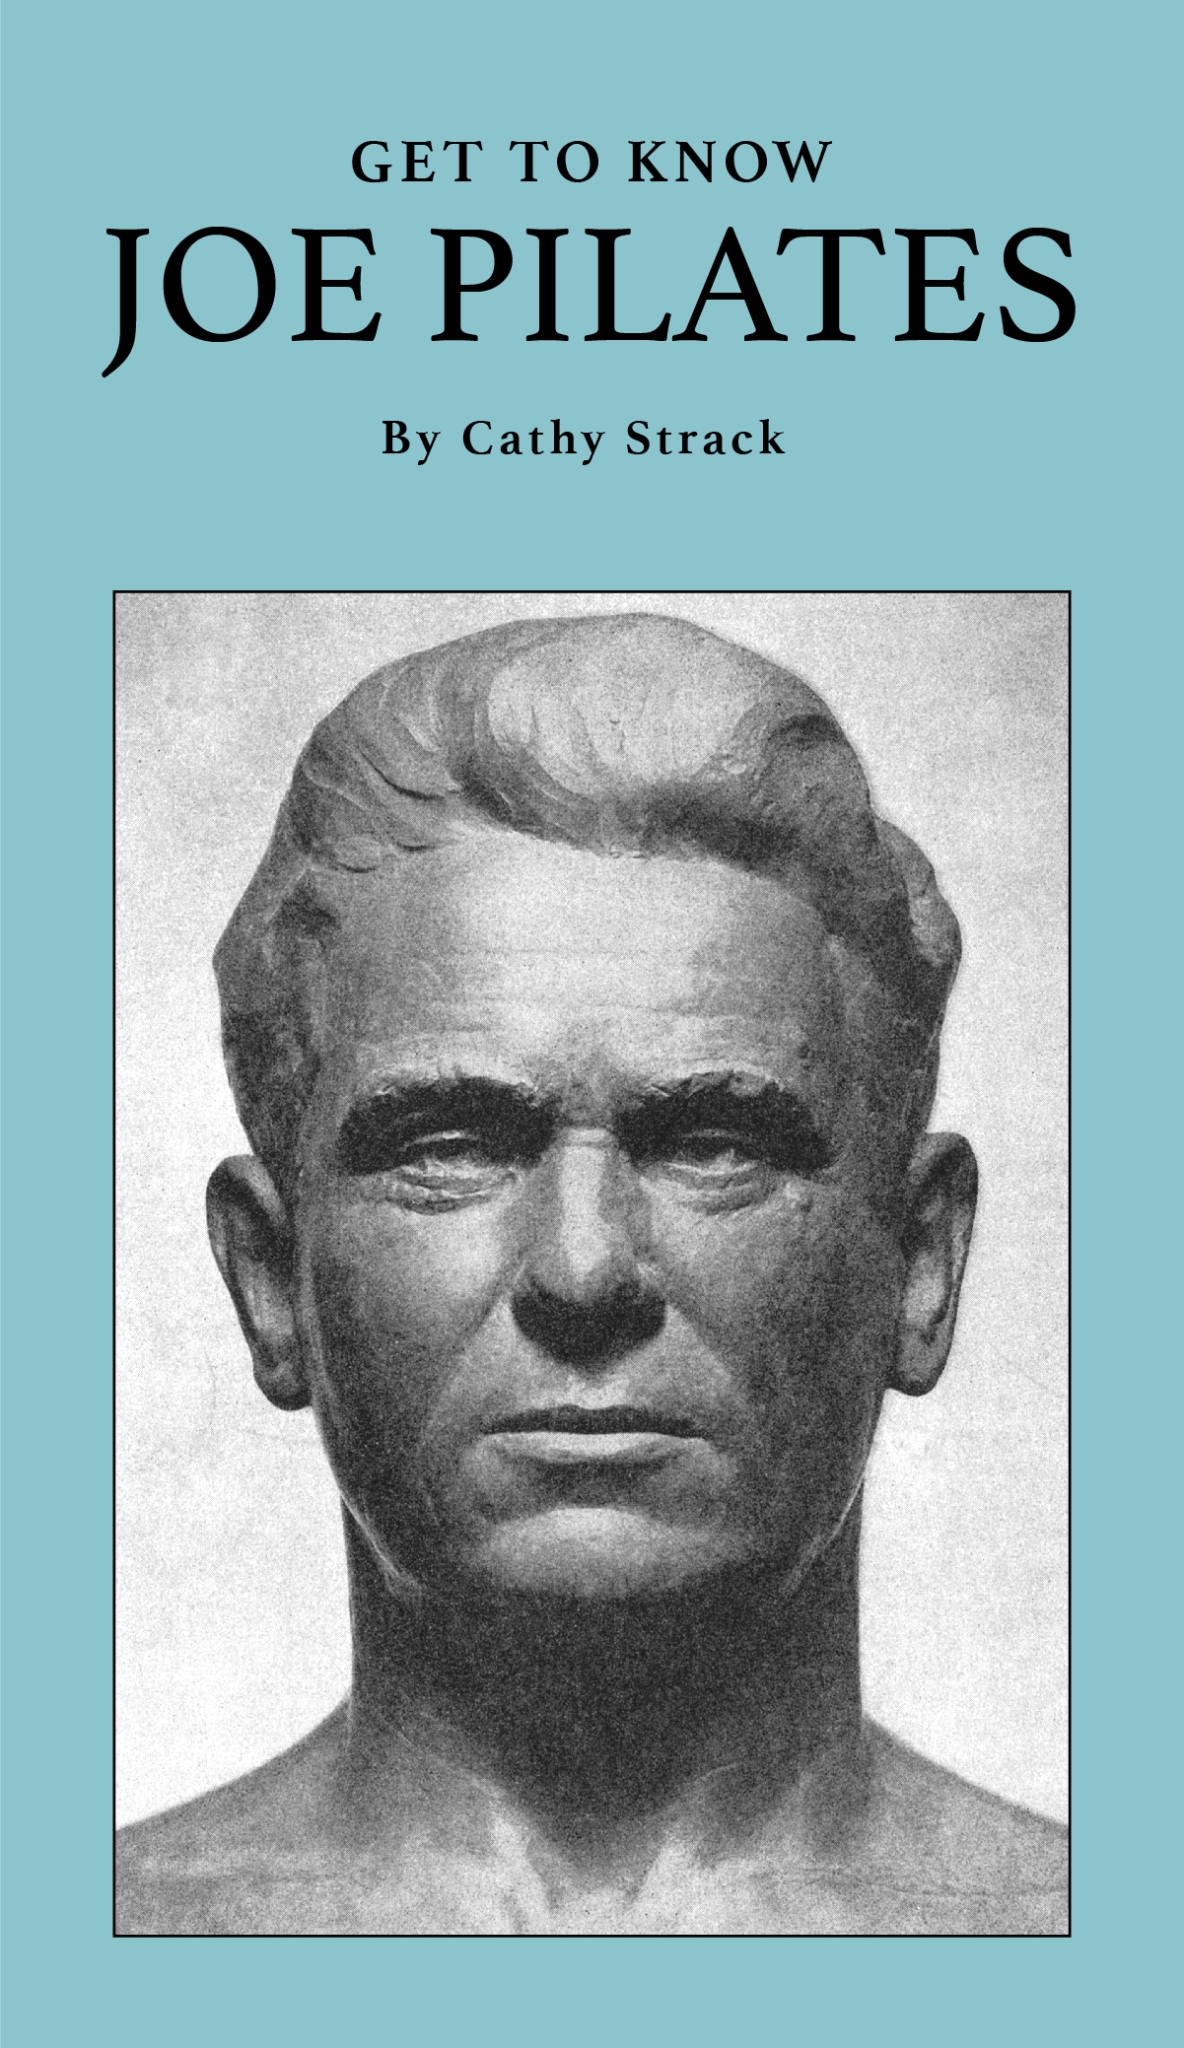 Get to Know Joe Pilates by Cathy Strack- A Book Review - JPilates